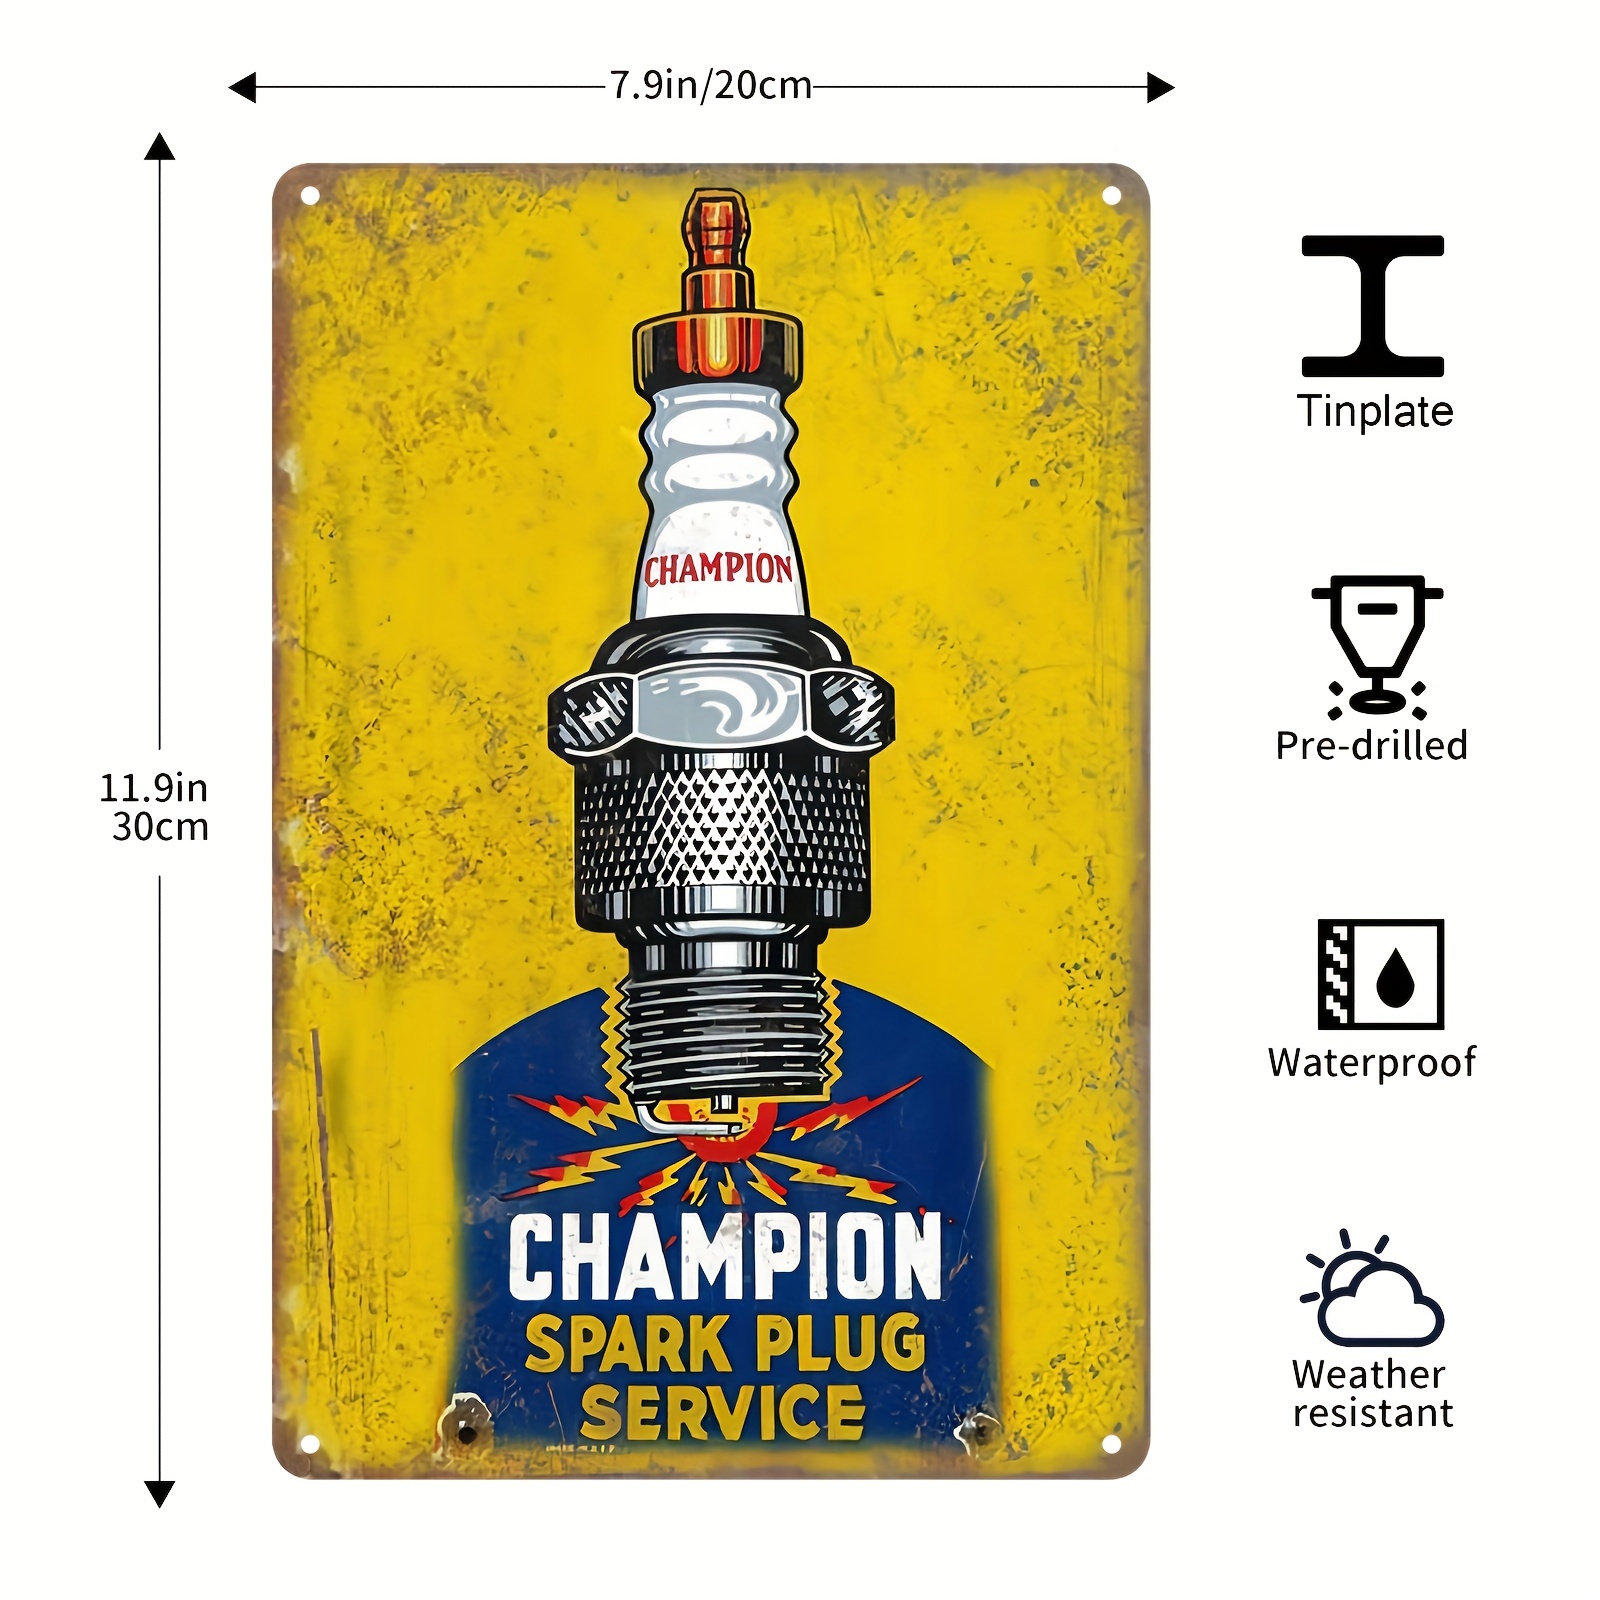 Champion Spark Plugs Tin Metal Sign Man Cave Decor Garage Gifts for Men  Wall Decor for Garage Rustic Vintage Style 11.75x7.75 Rectangle 